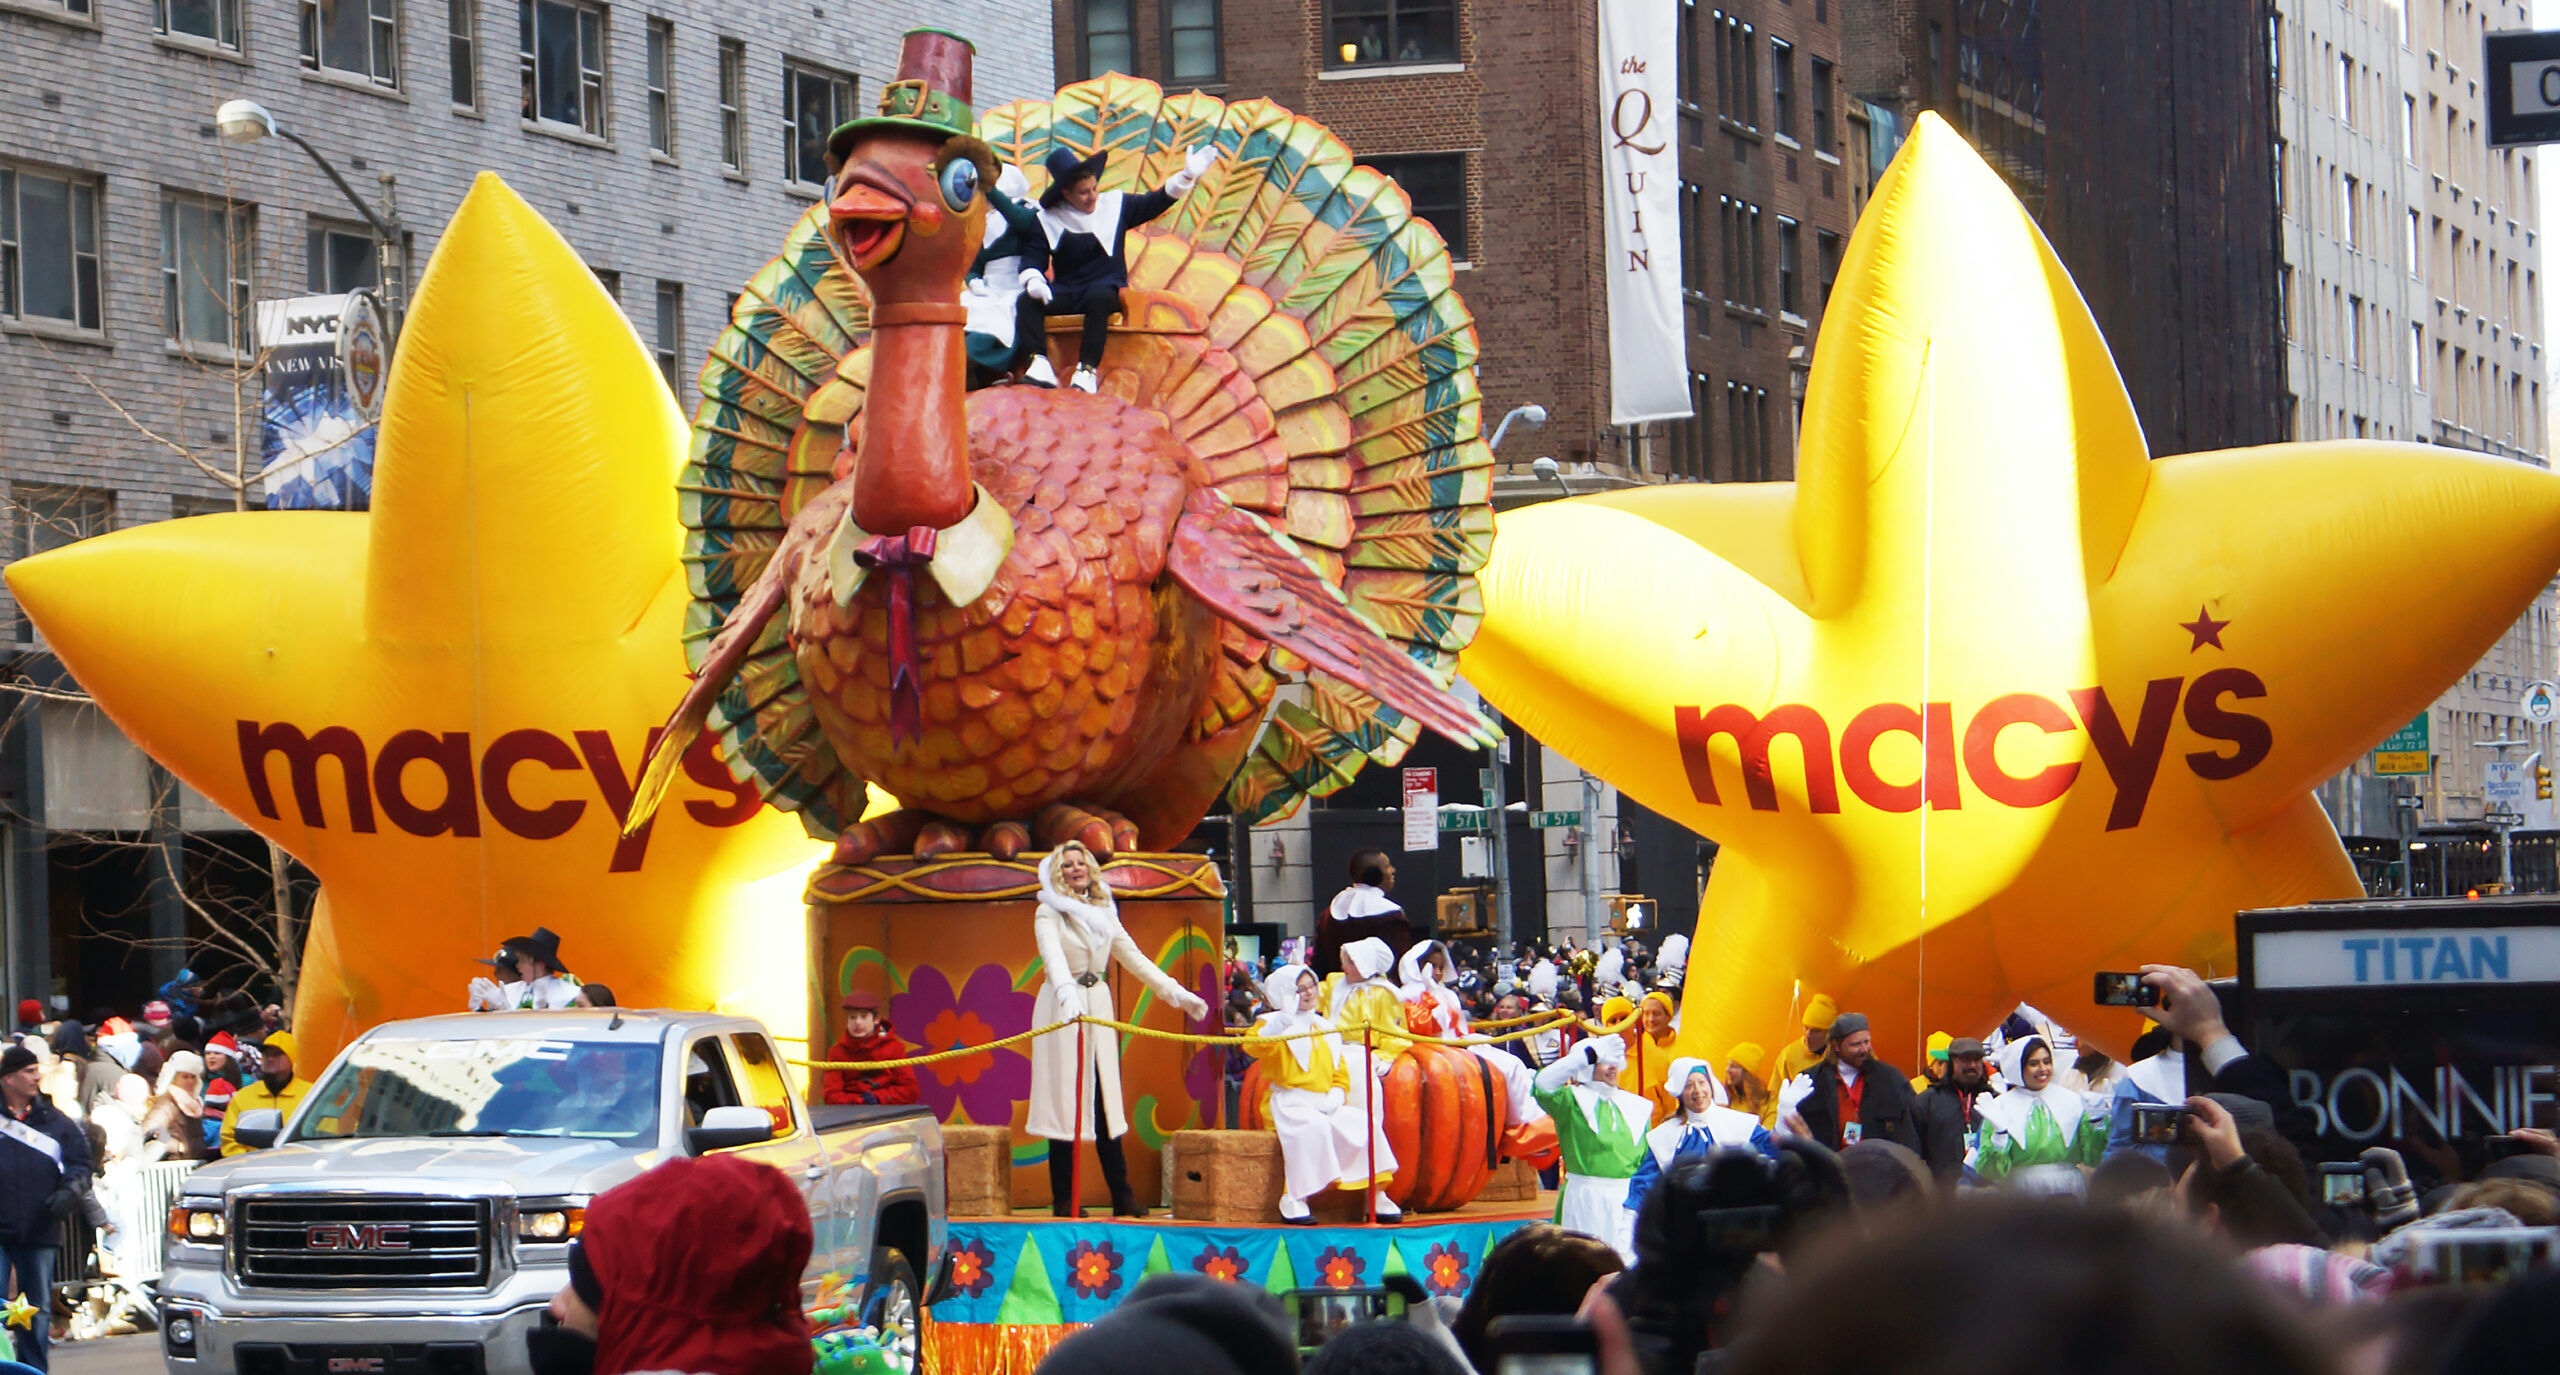 NEW YORK CITY - NOVEMBER 28 2013: the 87th annual Macy's Thanksgiving Day parade attracted hundreds of thousands of spectators. Turkey with Pilgrim riders. Parade marchers are in the streets while large yellow star balloons with Macy's written on them appear next to the large turkey float with a pilgrim riding on top of the bird.